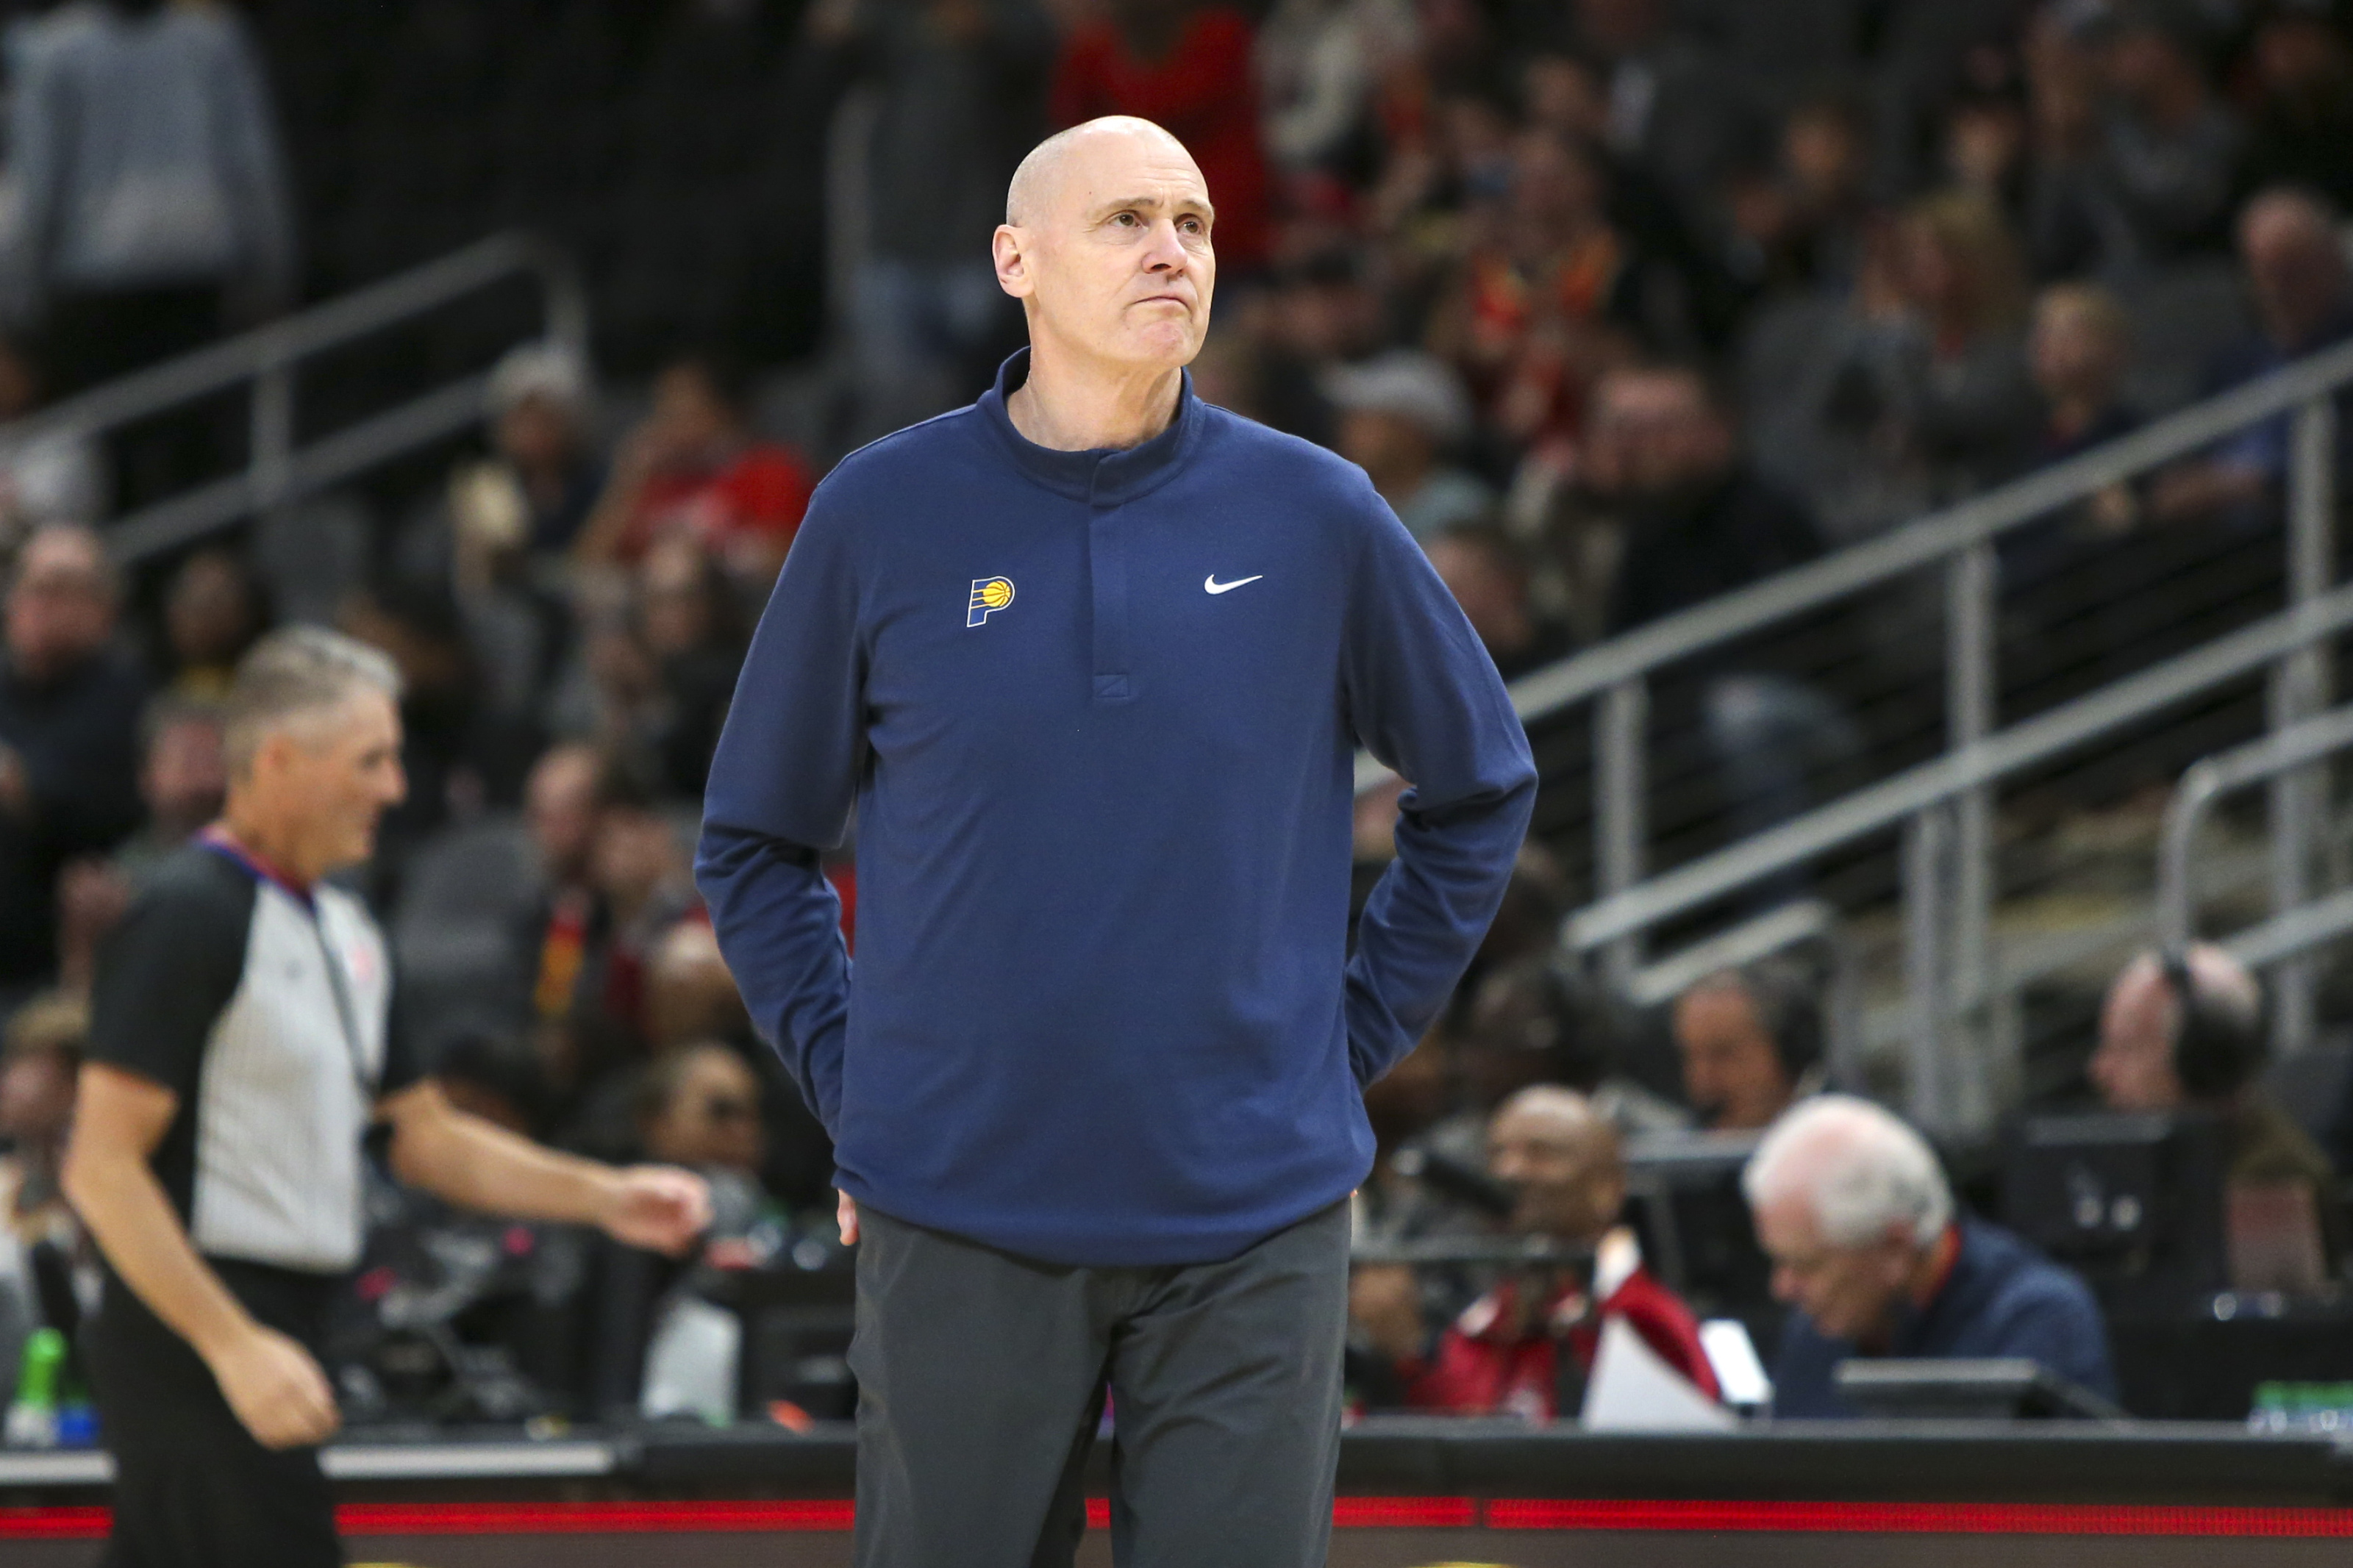 What Indiana Pacers coach Rick Carlisle said after drafting